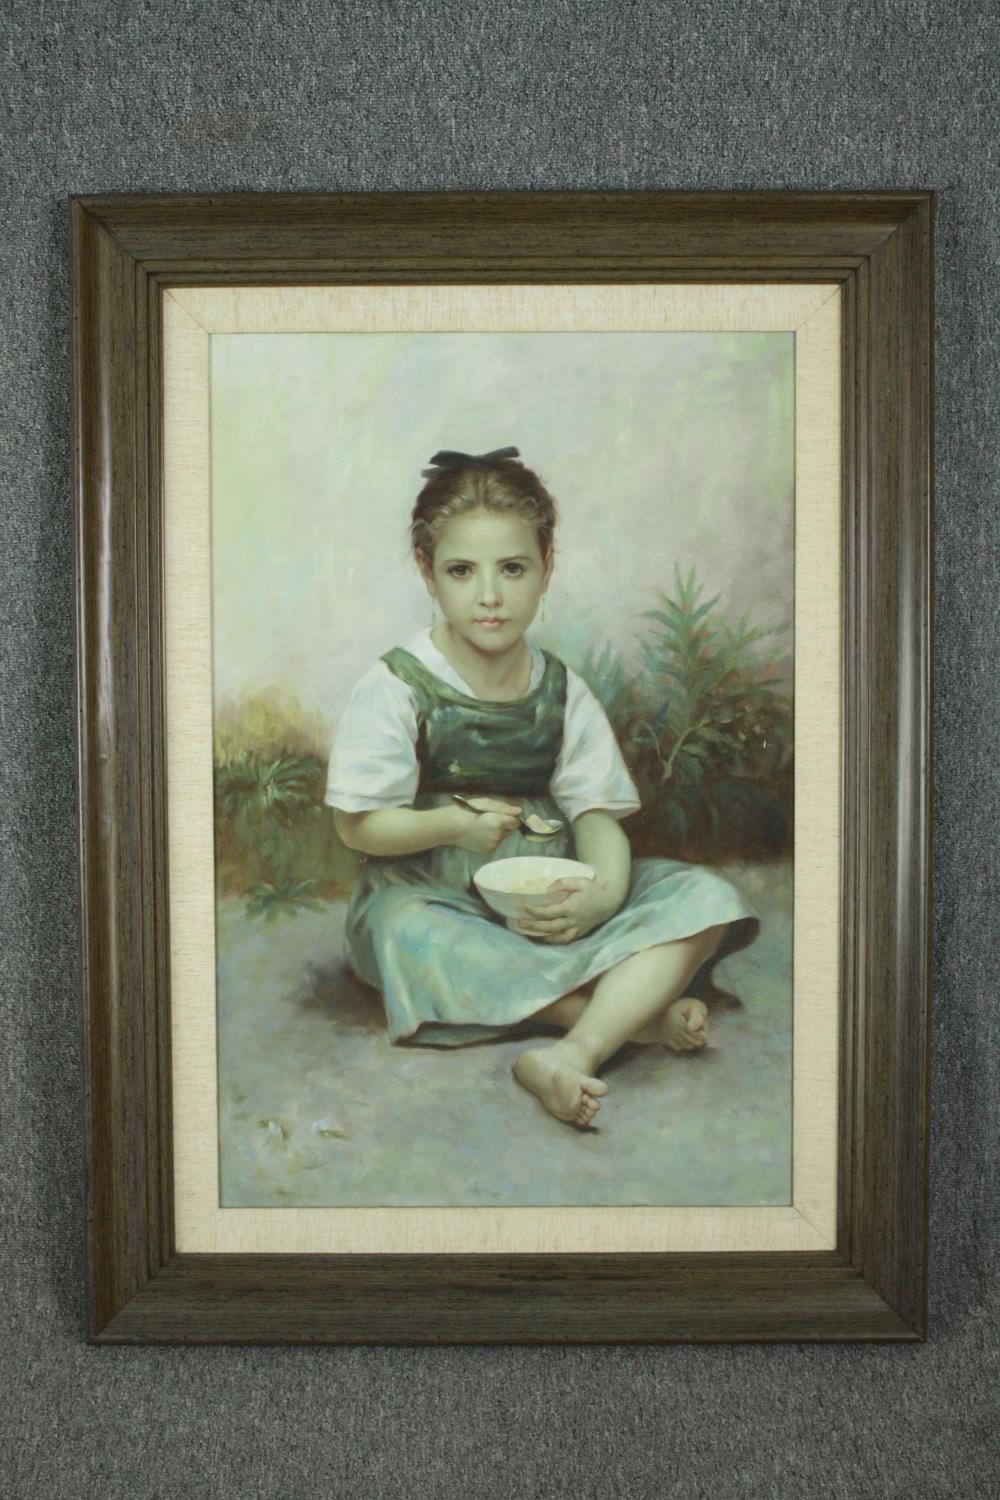 Oil on canvas, portrait a young seated girl eating from a bowl, in a hardwood frame. H.118 W.87cm. - Image 2 of 3